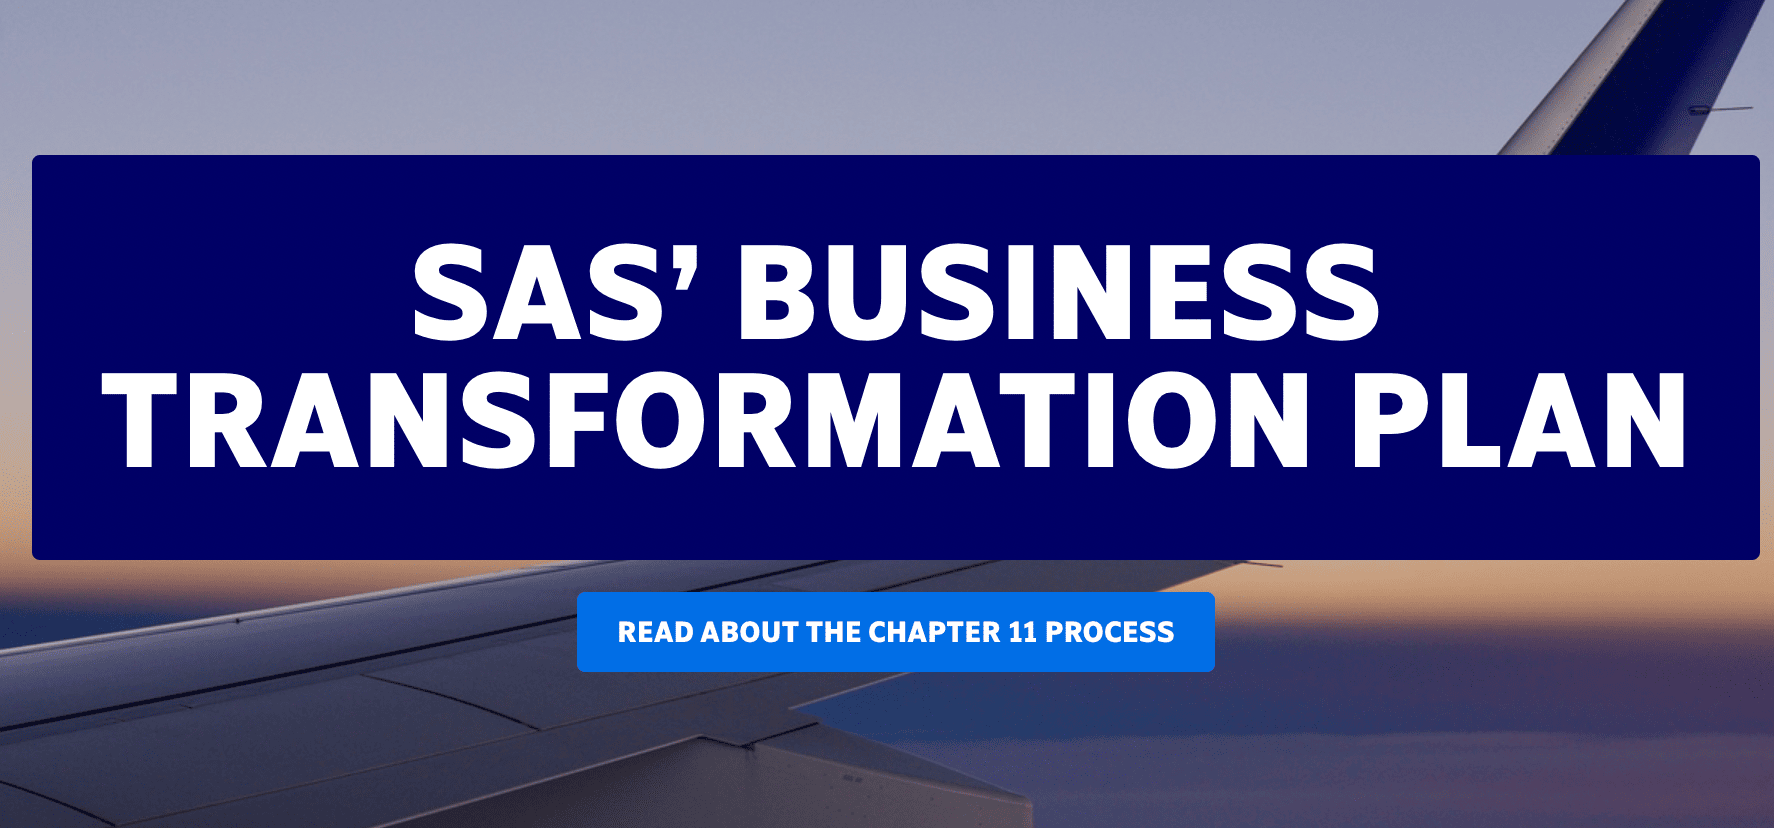 SAS files for bankruptcy (Chapter 11) in the US